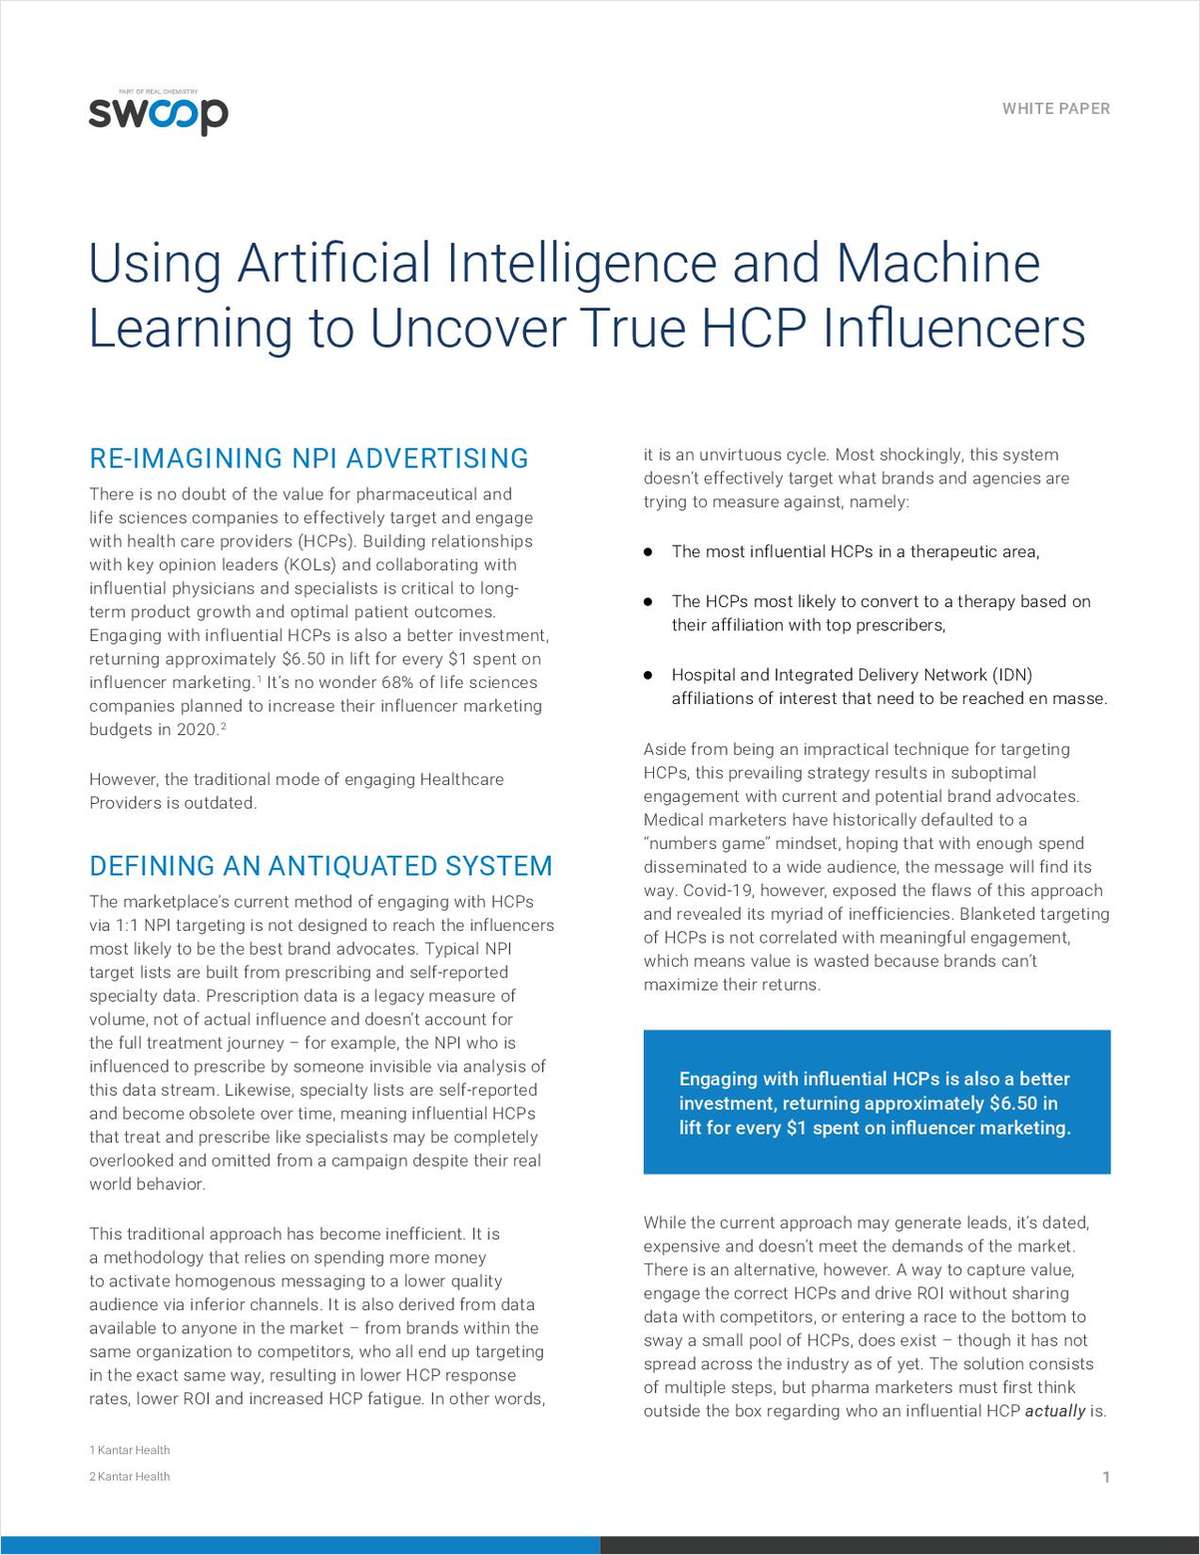 Using Artificial Intelligence and Machine Learning to Uncover True HCP Influencers